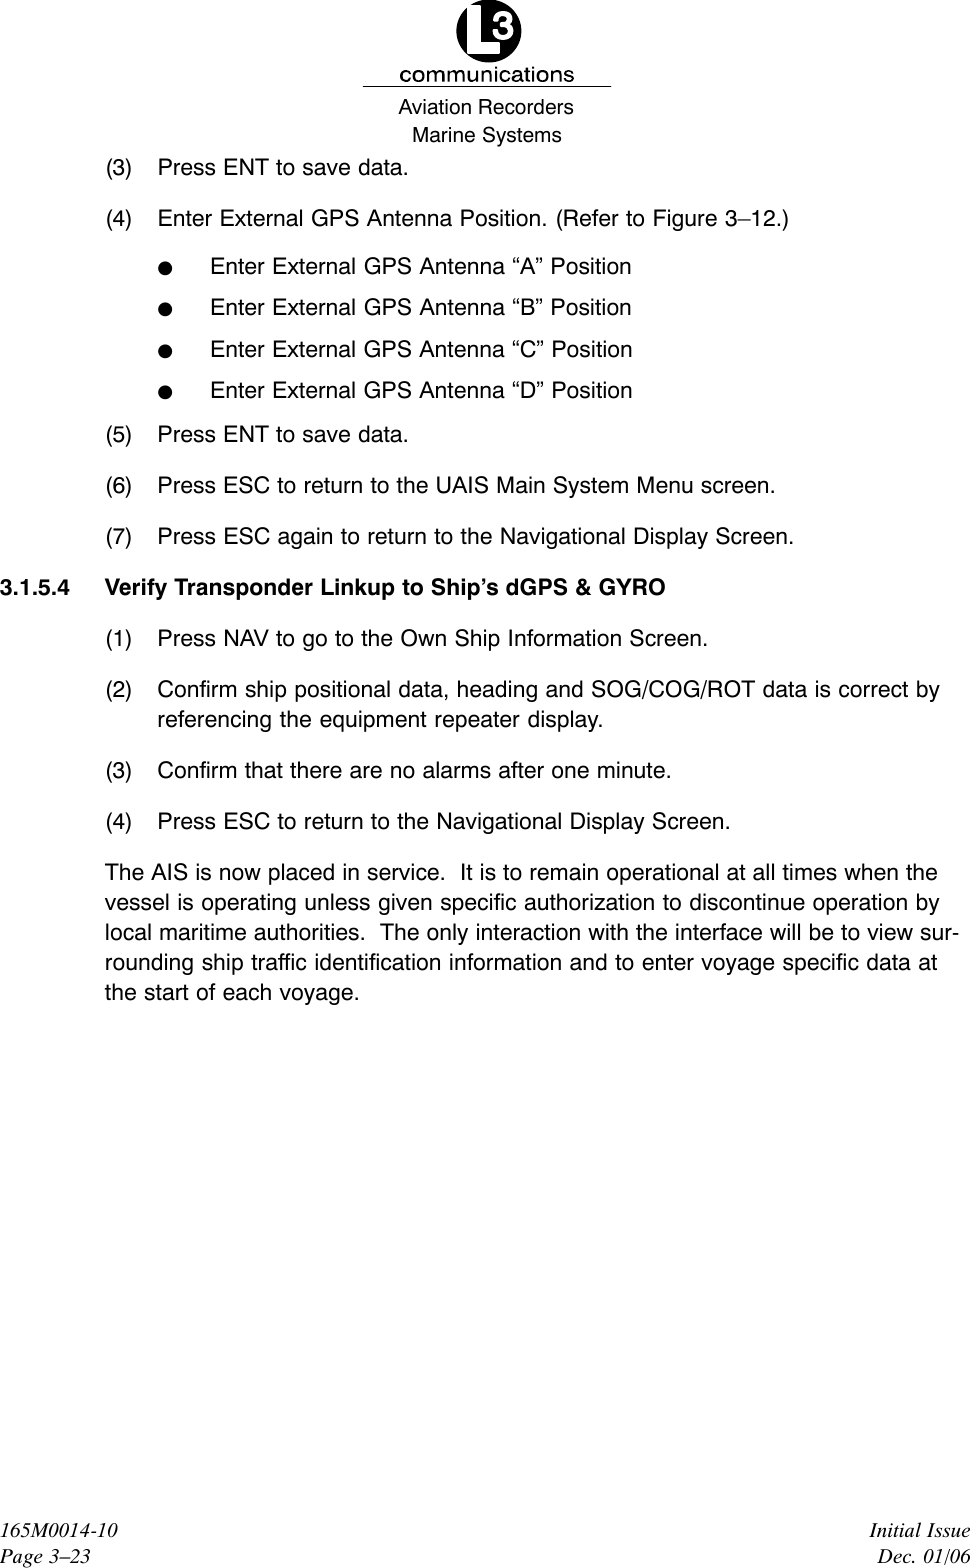 Marine SystemsAviation RecordersInitial IssueDec. 01/06165M0014-10Page 3–23(3) Press ENT to save data.(4) Enter External GPS Antenna Position. (Refer to Figure 3–12.)FEnter External GPS Antenna “A” PositionFEnter External GPS Antenna “B” PositionFEnter External GPS Antenna “C” PositionFEnter External GPS Antenna “D” Position(5) Press ENT to save data.(6) Press ESC to return to the UAIS Main System Menu screen.(7) Press ESC again to return to the Navigational Display Screen.3.1.5.4 Verify Transponder Linkup to Ship’s dGPS &amp; GYRO (1) Press NAV to go to the Own Ship Information Screen.(2) Confirm ship positional data, heading and SOG/COG/ROT data is correct byreferencing the equipment repeater display.(3) Confirm that there are no alarms after one minute.(4) Press ESC to return to the Navigational Display Screen.The AIS is now placed in service.  It is to remain operational at all times when thevessel is operating unless given specific authorization to discontinue operation bylocal maritime authorities.  The only interaction with the interface will be to view sur-rounding ship traffic identification information and to enter voyage specific data atthe start of each voyage.